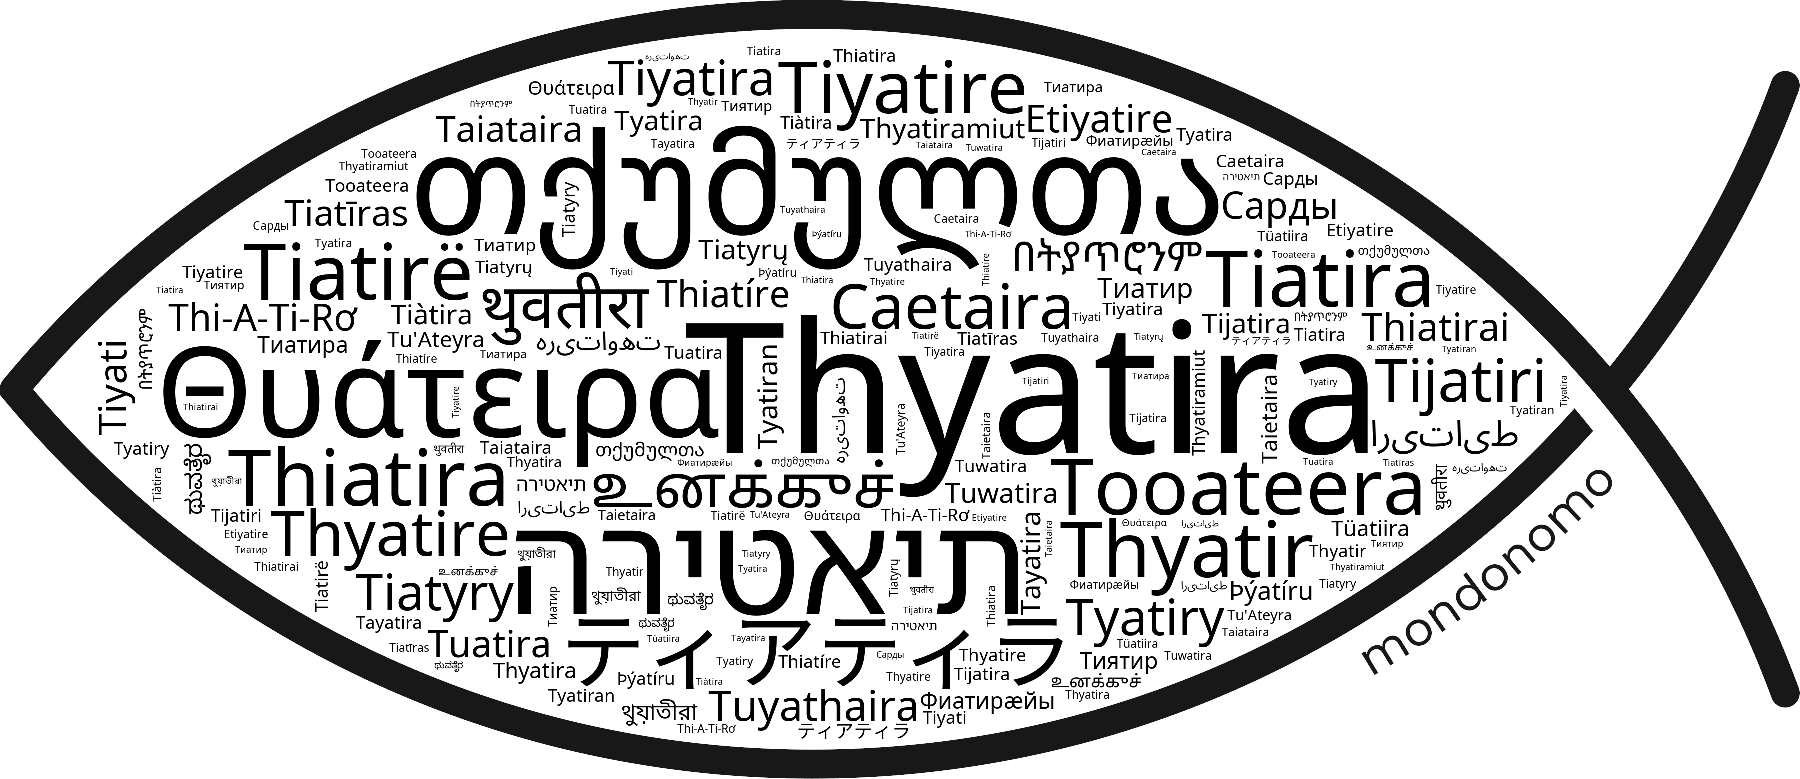 Name Thyatira in the world's Bibles